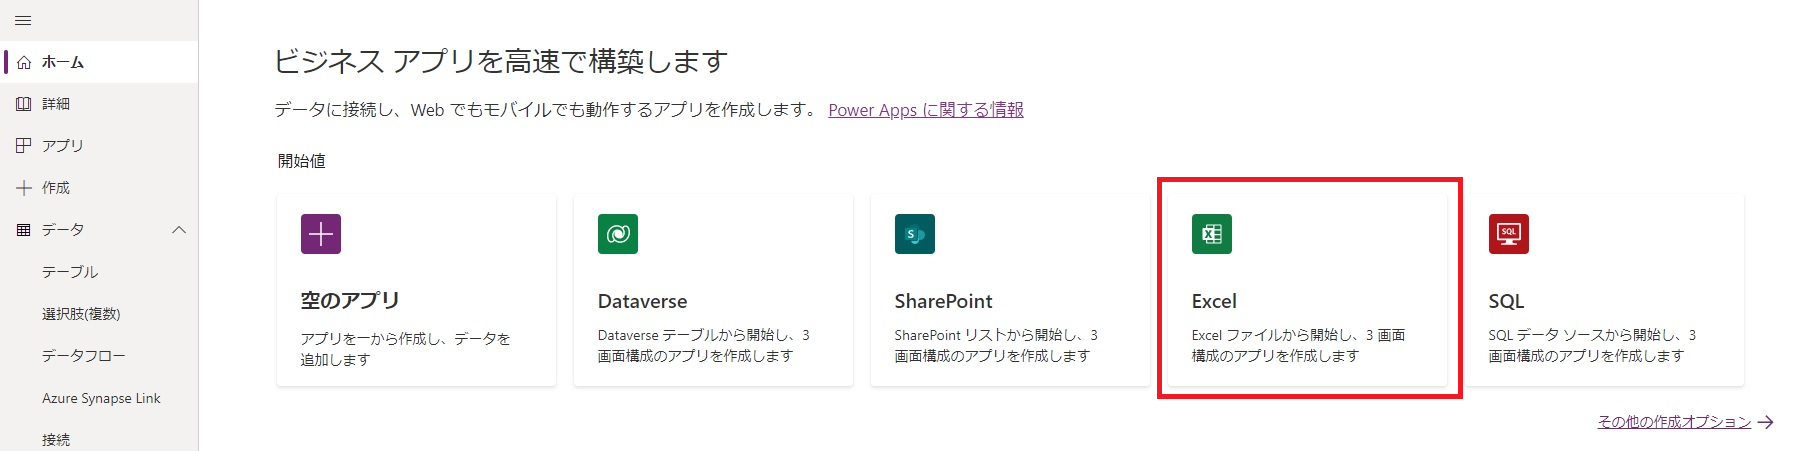 Power Apps ホーム画面.png